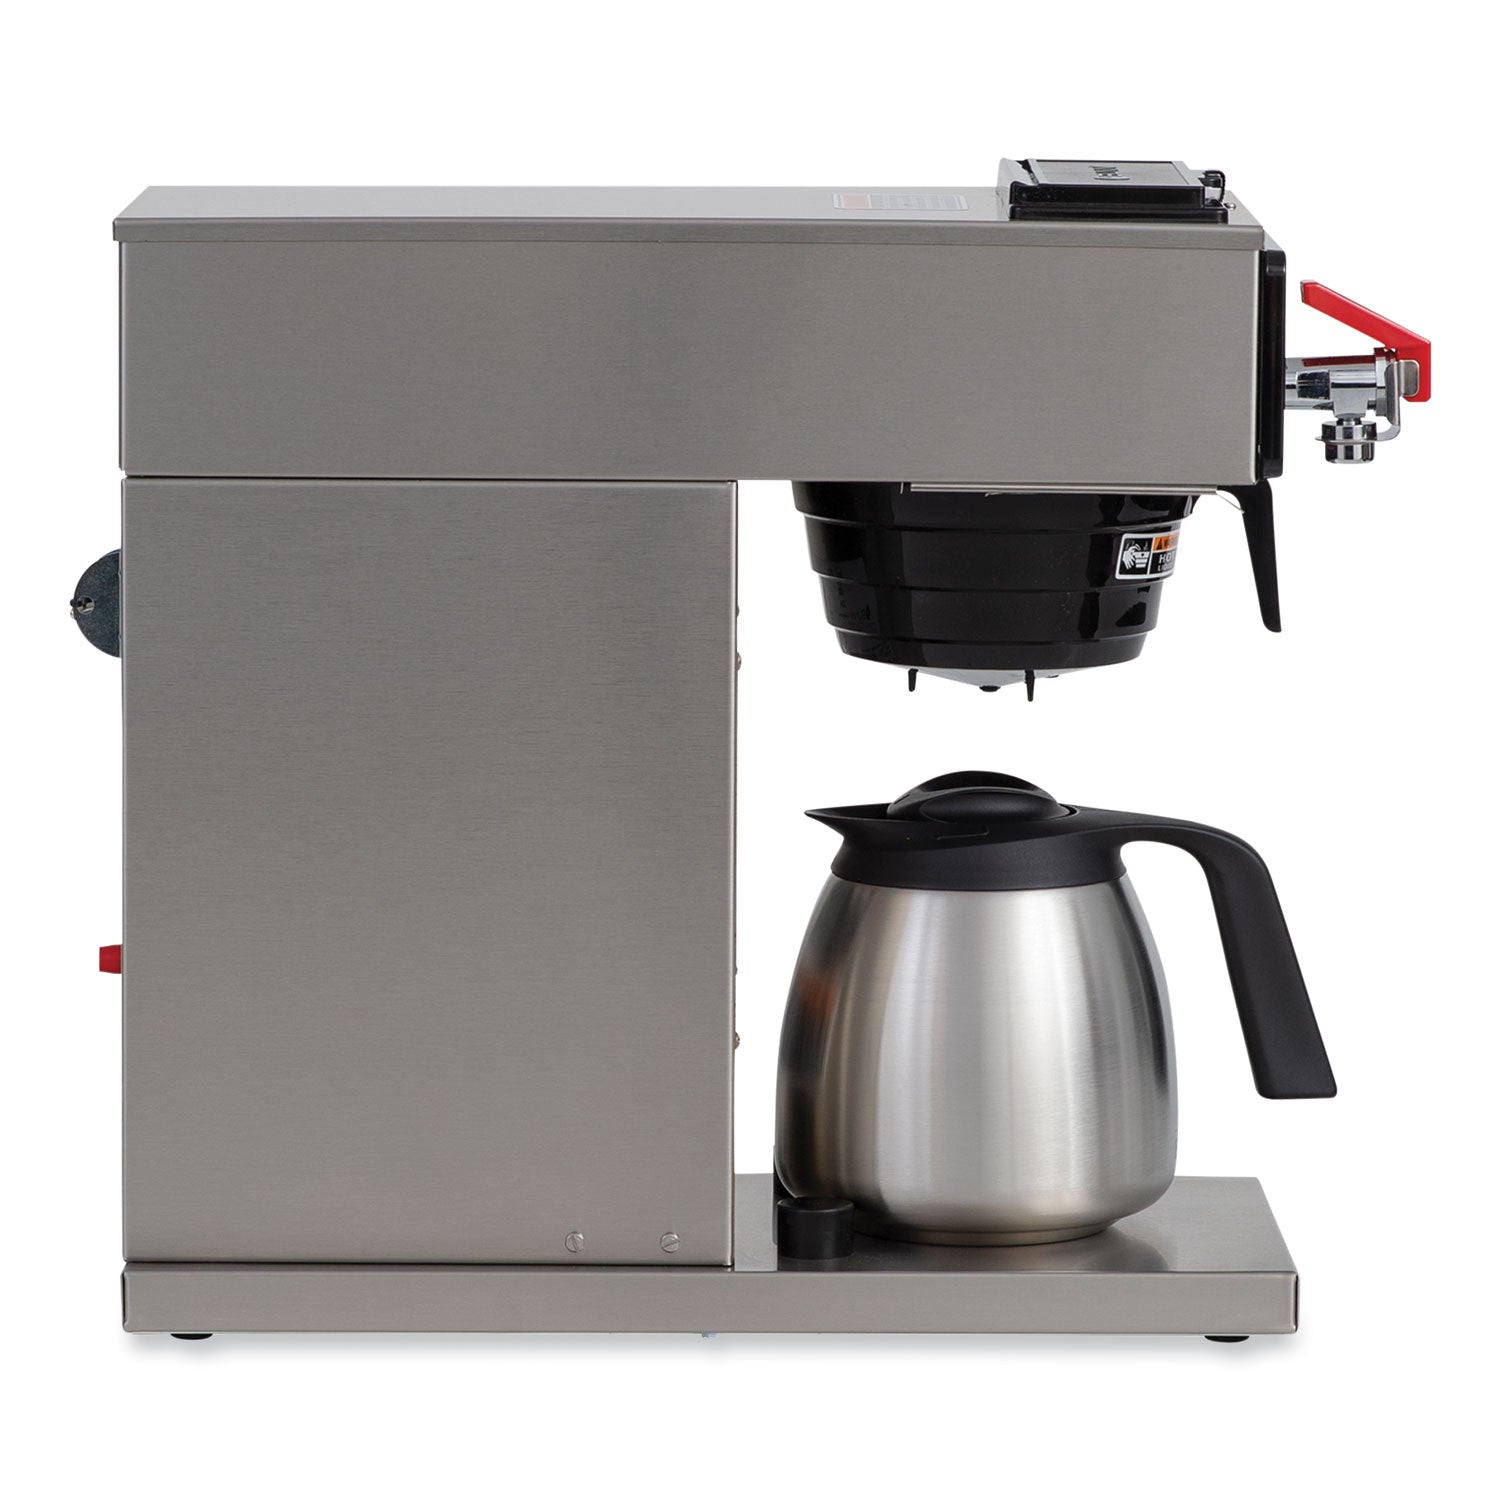 cwtf15-tc-12-cup-automatic-thermal-coffee-brewer-gray-stainless-steel-ships-in-7-10-business-days_bun129500360 - 4